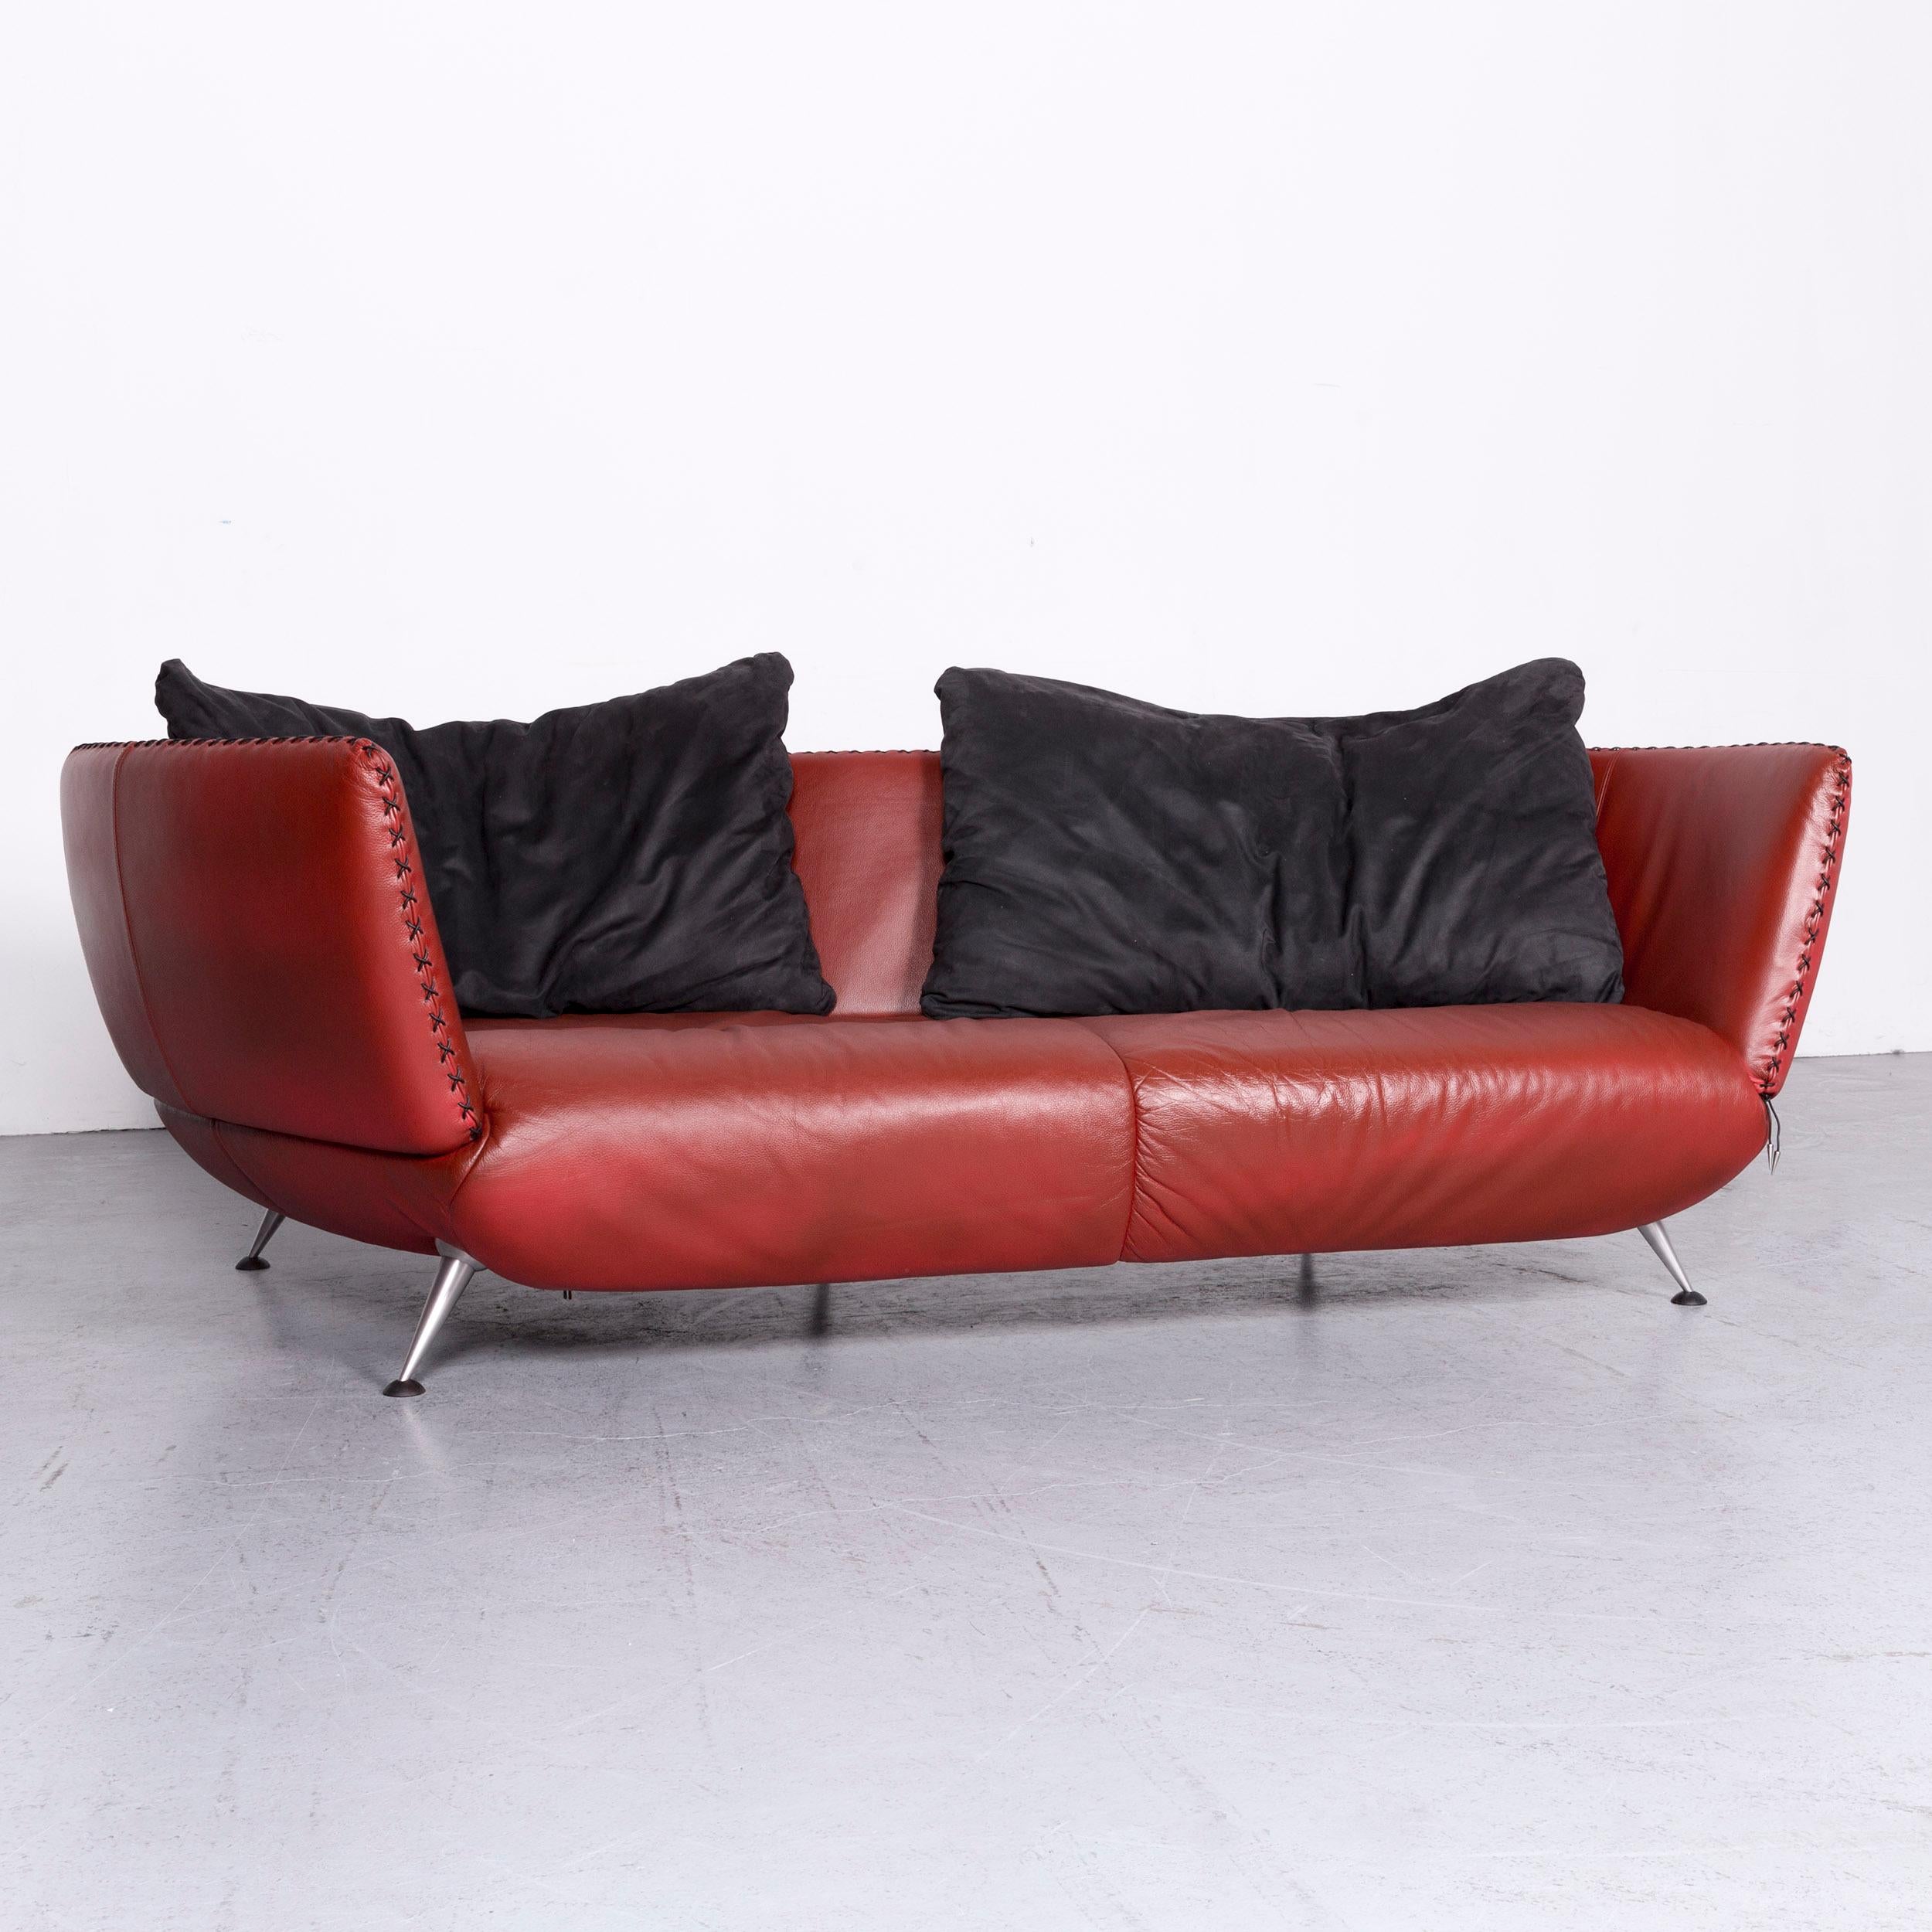 We bring to you a De Sede Ds 102 designer leather sofa red two-seat couch.









